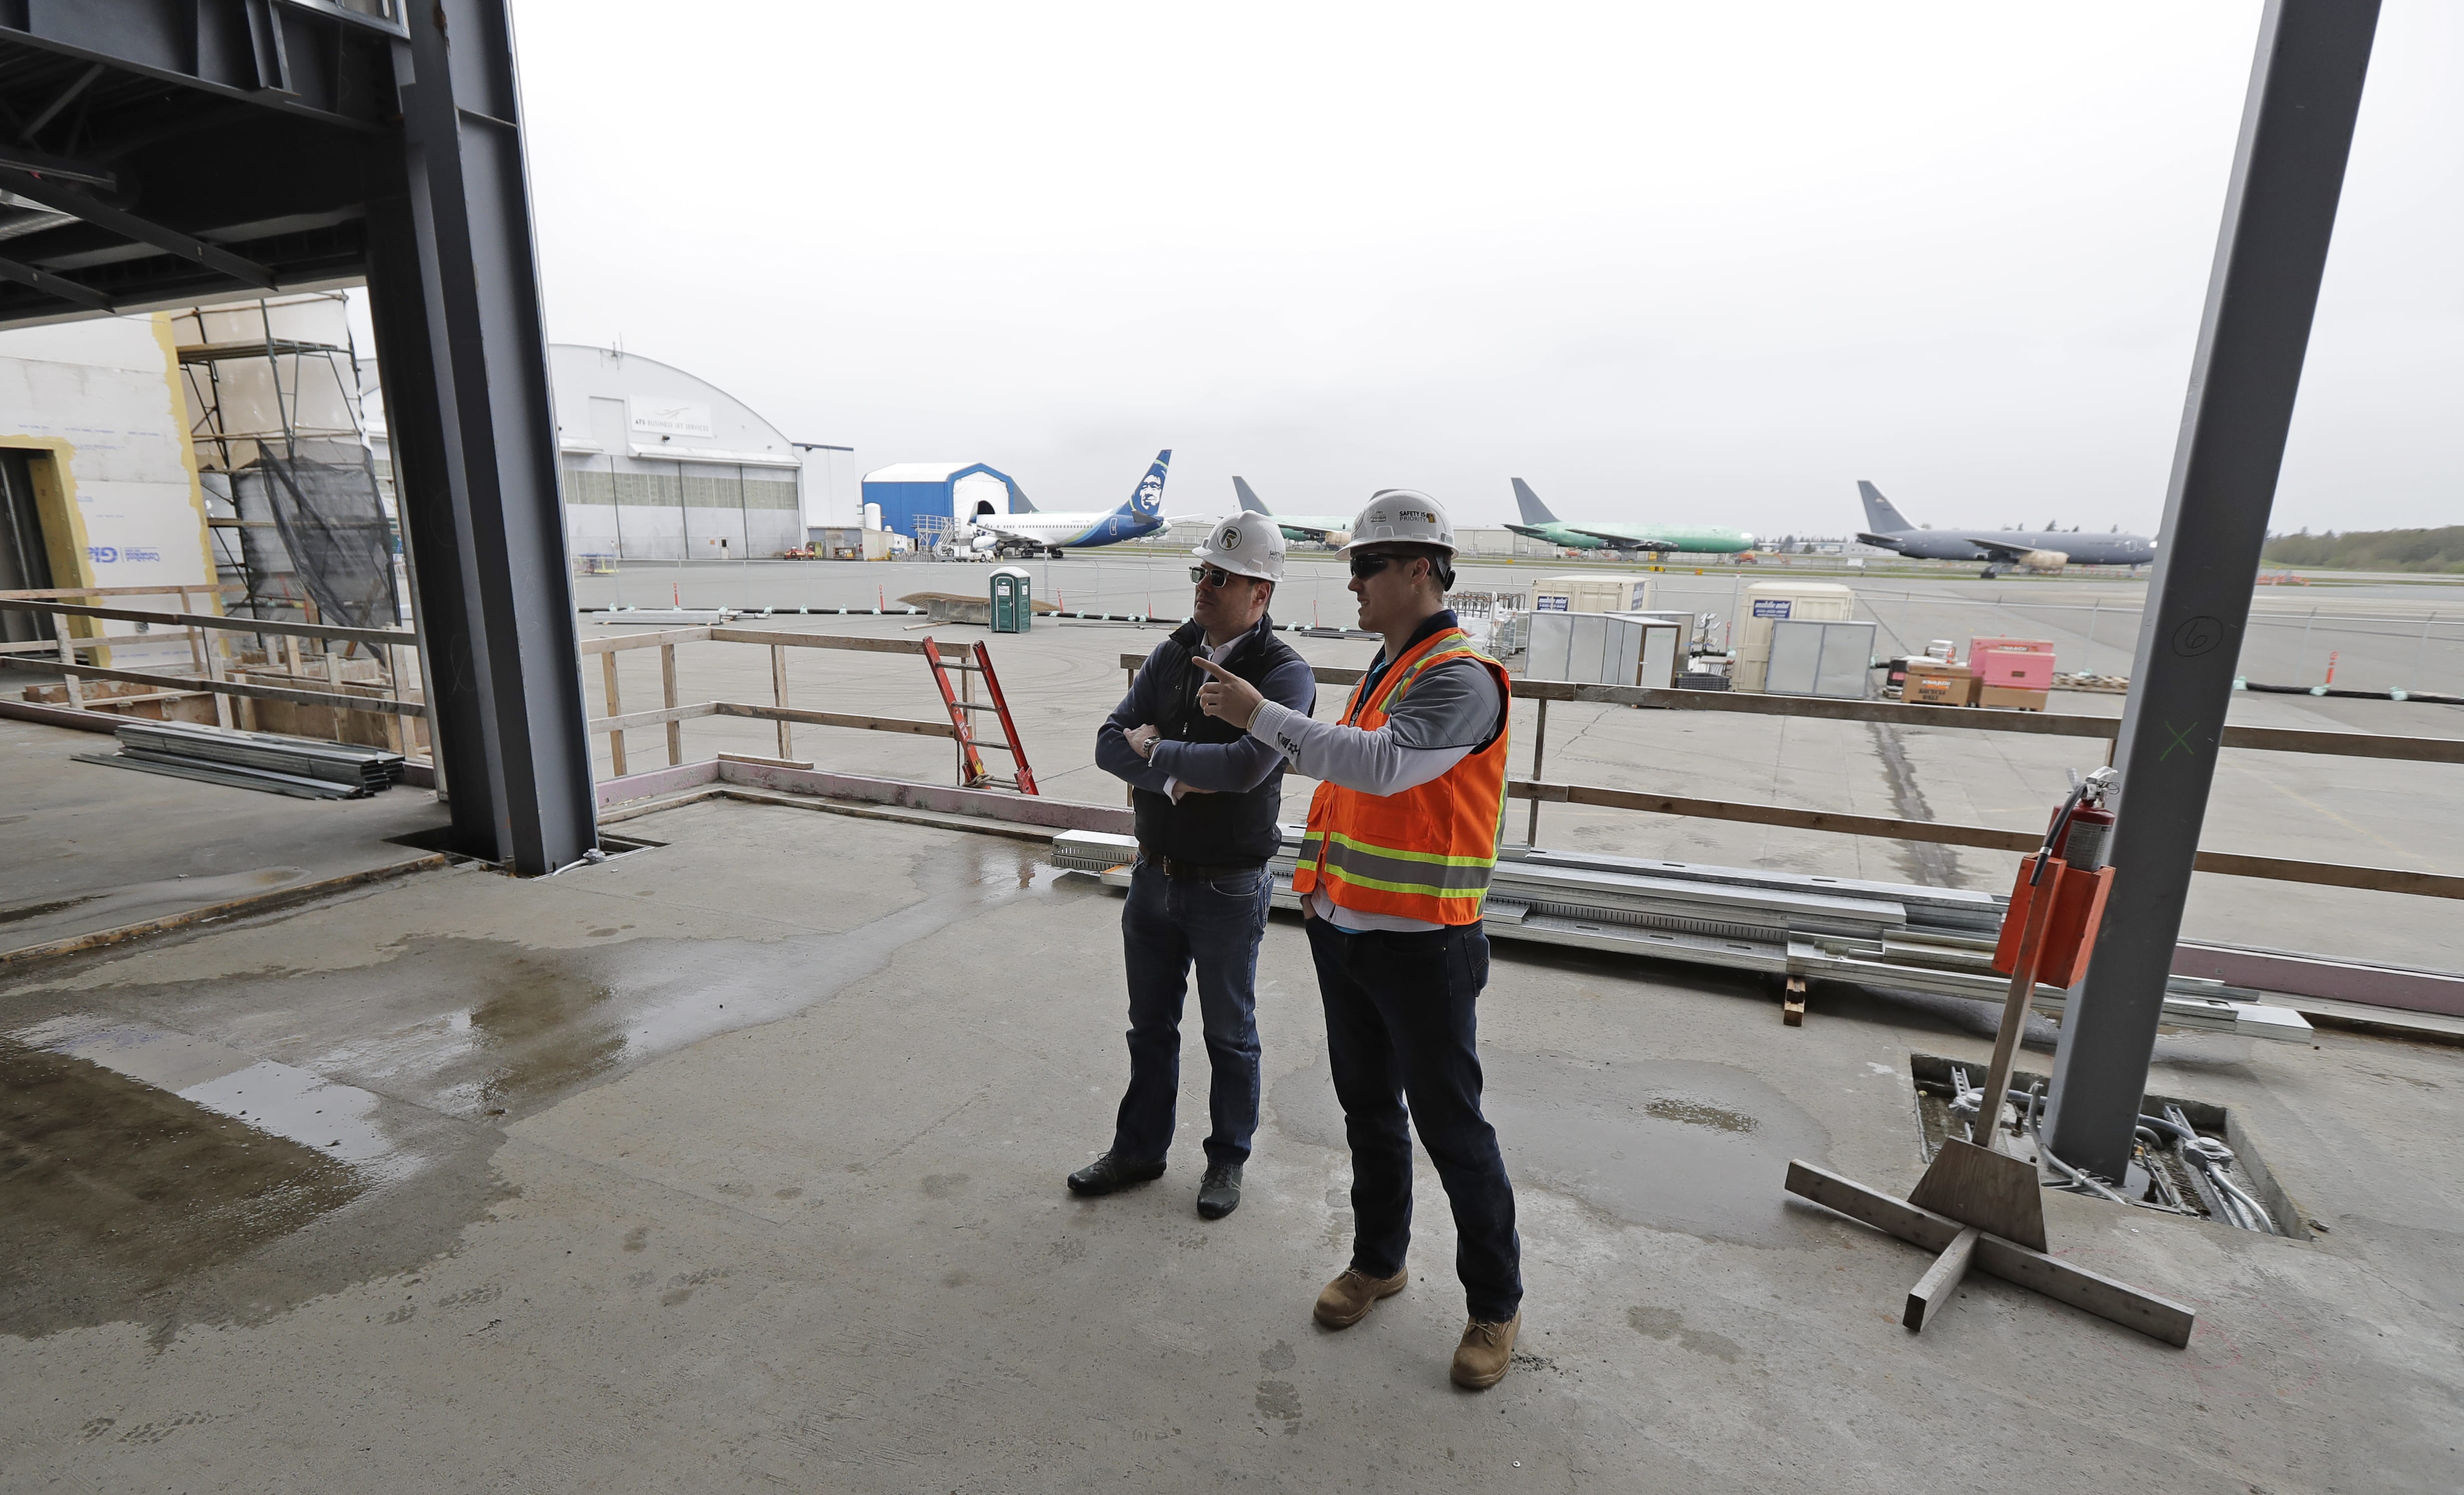 In this April 11, 2018 photo, Brett Smith, CEO of Propeller Airports, left, talks with project engineer Todd Raynes, right, inside the privately-run commercial U.S. airport terminal Smith's company is building at Paine Field in Everett, Wash. Propeller Airports sold $50 million in bonds earlier this year to finance the construction, according to data obtained by The Associated Press. The terminal has commitments from Alaska Airlines, Southwest Airlines and United Airlines for up to 24 daily flights, mostly to destinations in the West and Midwest. (AP Photo/Ted S.